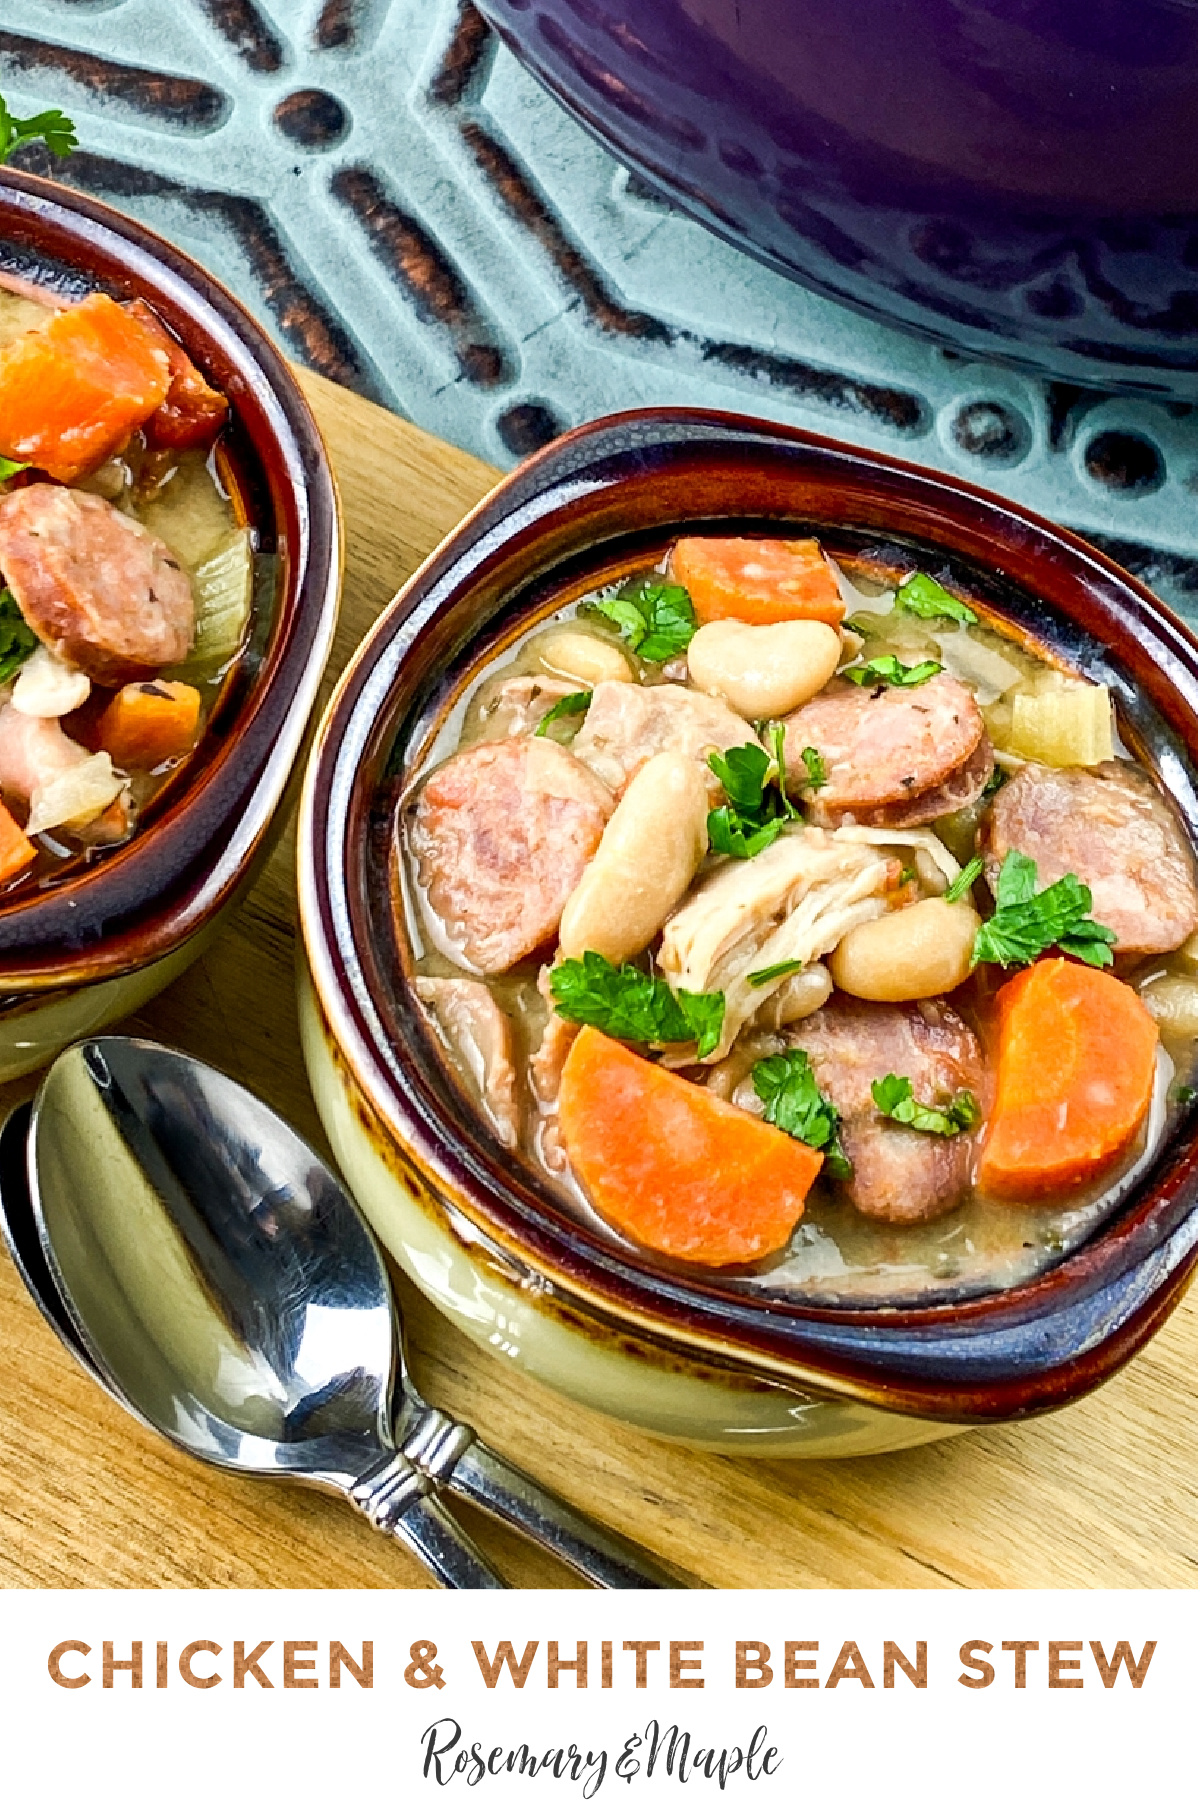 Make this hearty chicken and white bean stew that's perfect for a cold evening. It's a recipe for a nourishing, satisfying weekday meal.